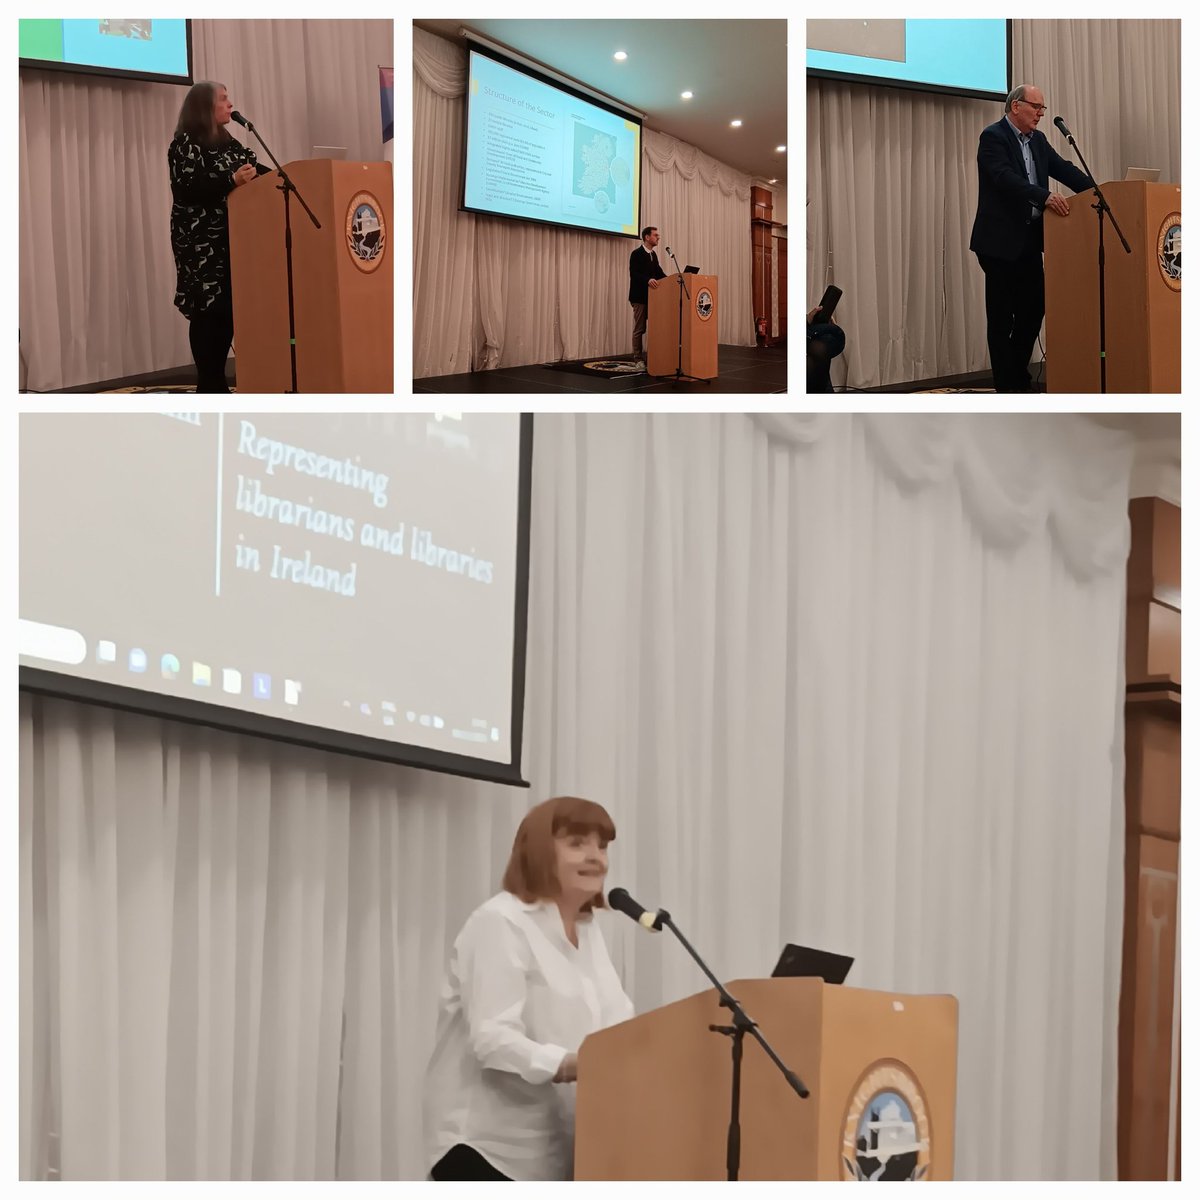 Great day @LAIonline public libraries conference in Trim. Enlightening talks from @tzu_ham @LibrariesIre @CatherineGalla1 @DLR_Libraries Emer O'Brien @corkcolibrary Damien Brady @LimerickLibrary Loads of inspiration and sheer magic from @LaureatenanOg Patricia Forde #LAIPLC2023